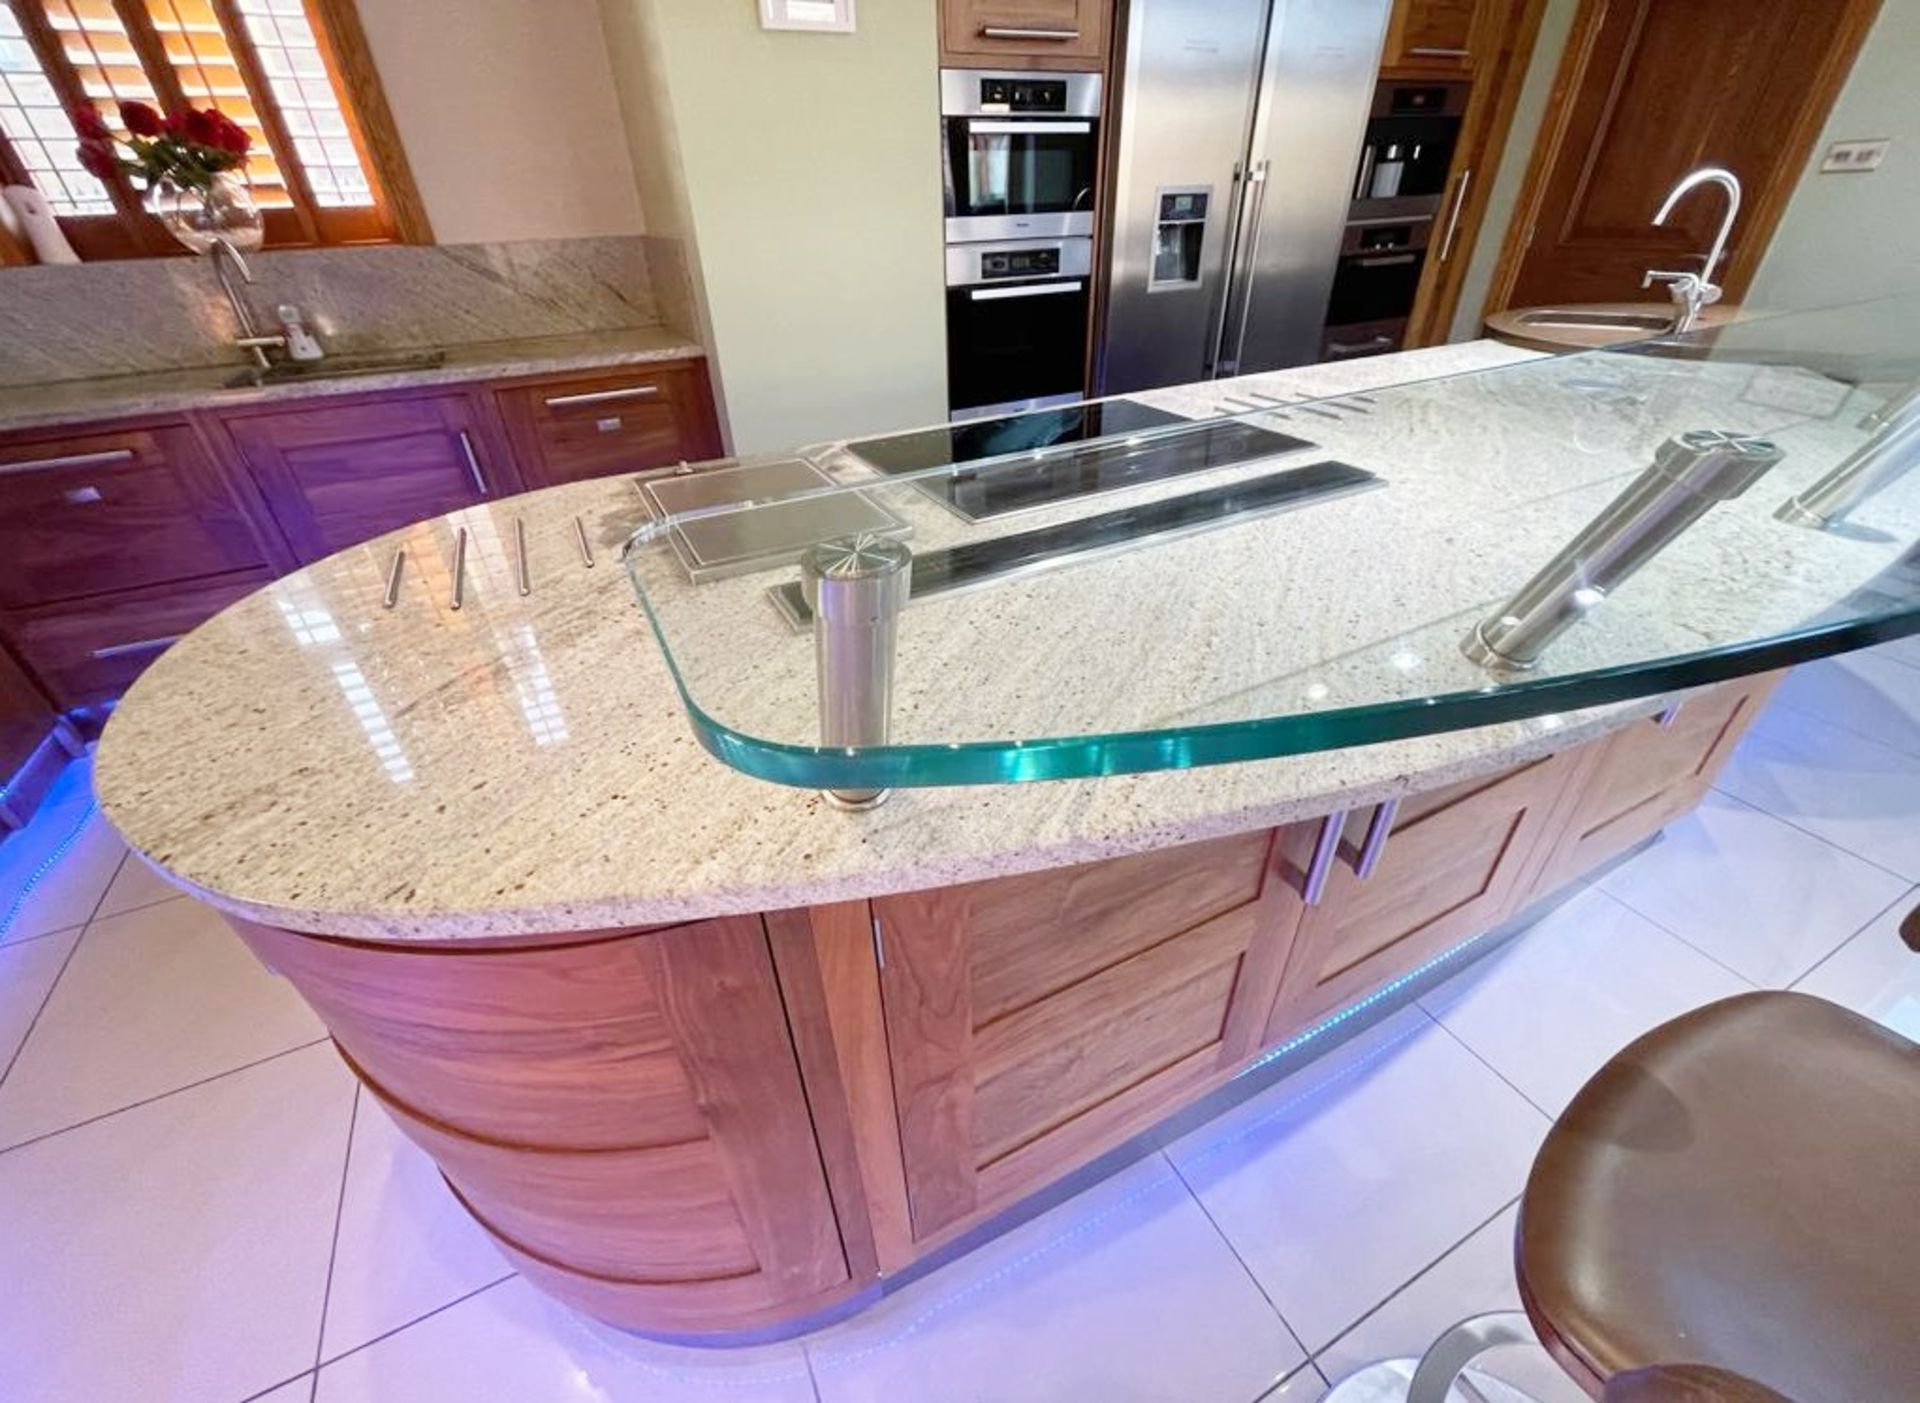 1 x Bespoke Curved Fitted Kitchen With Solid Wood Walnut Doors, Integrated Appliances, Granite Tops - Image 6 of 147